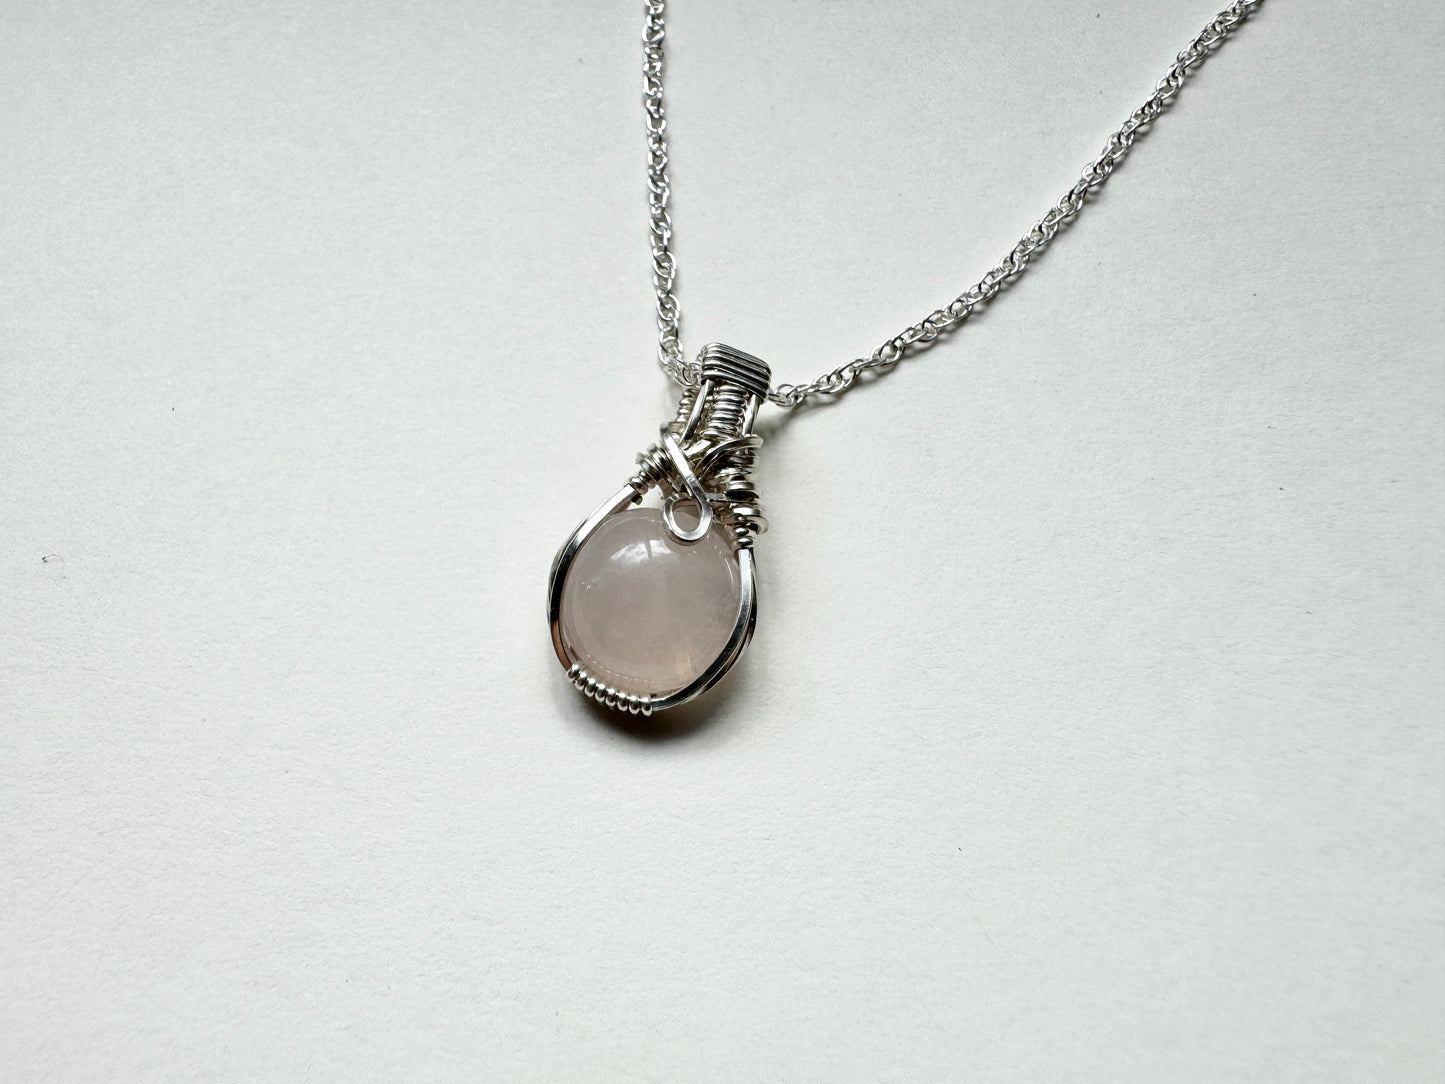 Small Rose Quartz Necklace in Sterling Silver